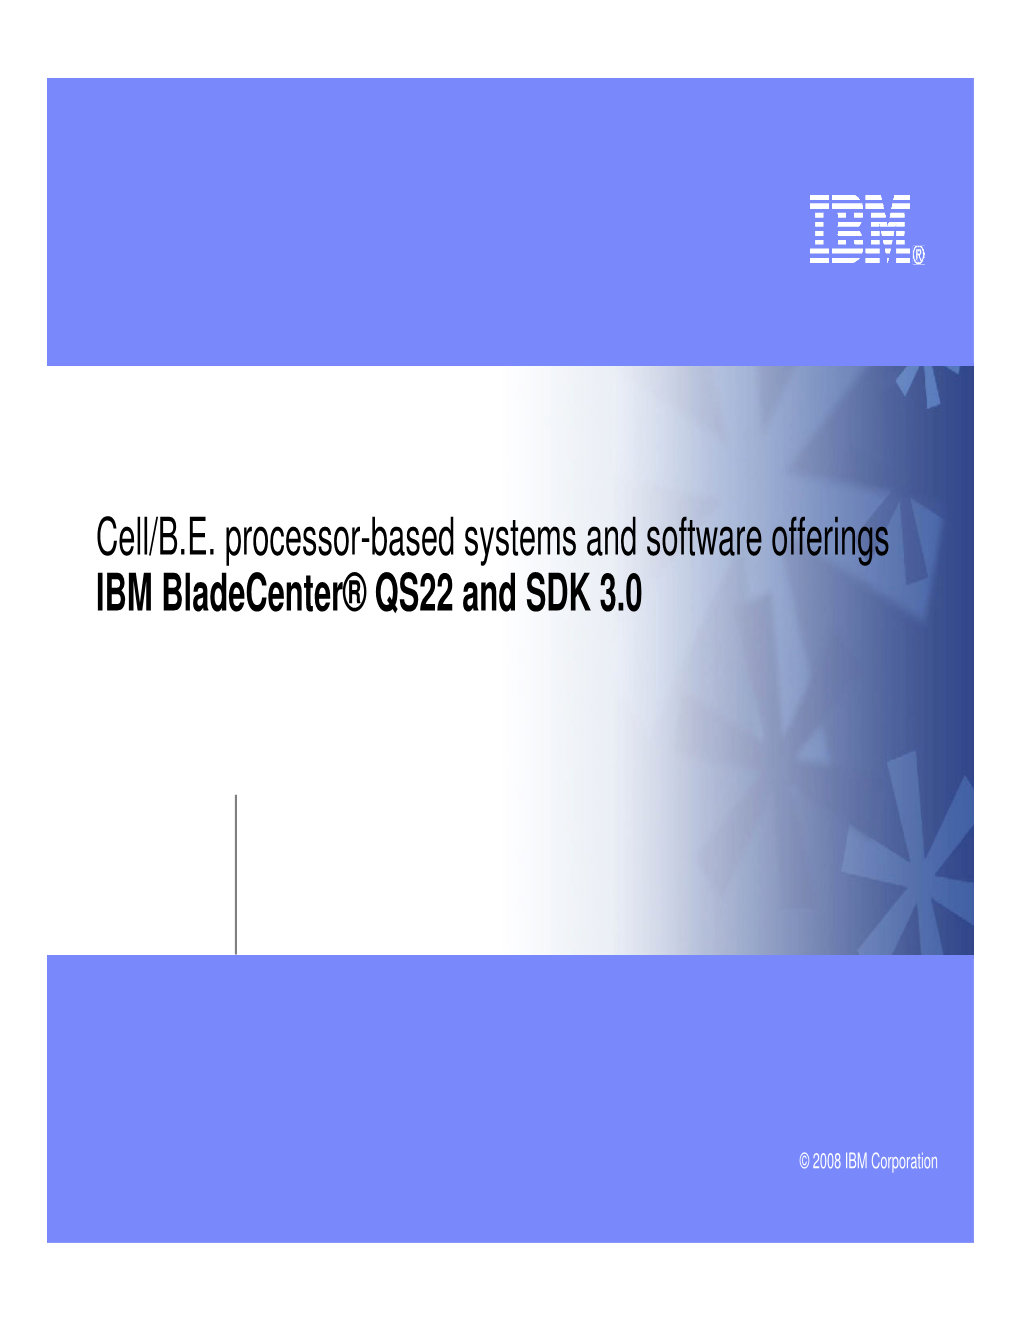 Cell/BE Processor-Based Systems and Software Offerings IBM Bladecenter